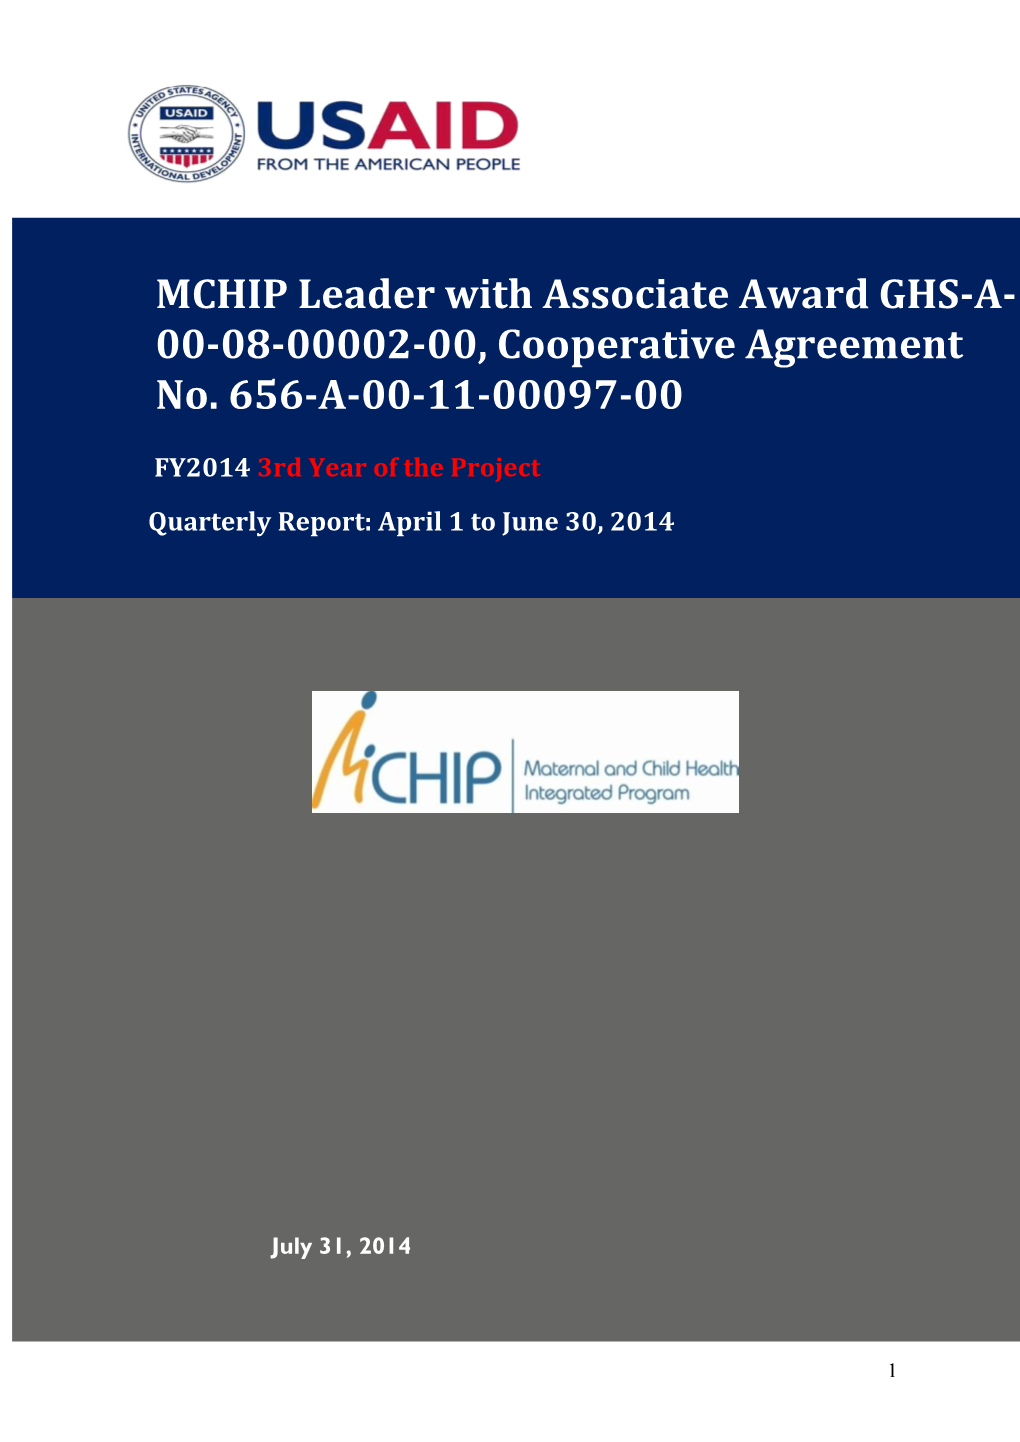 MCHIP Leader with Associate Award GHS-A